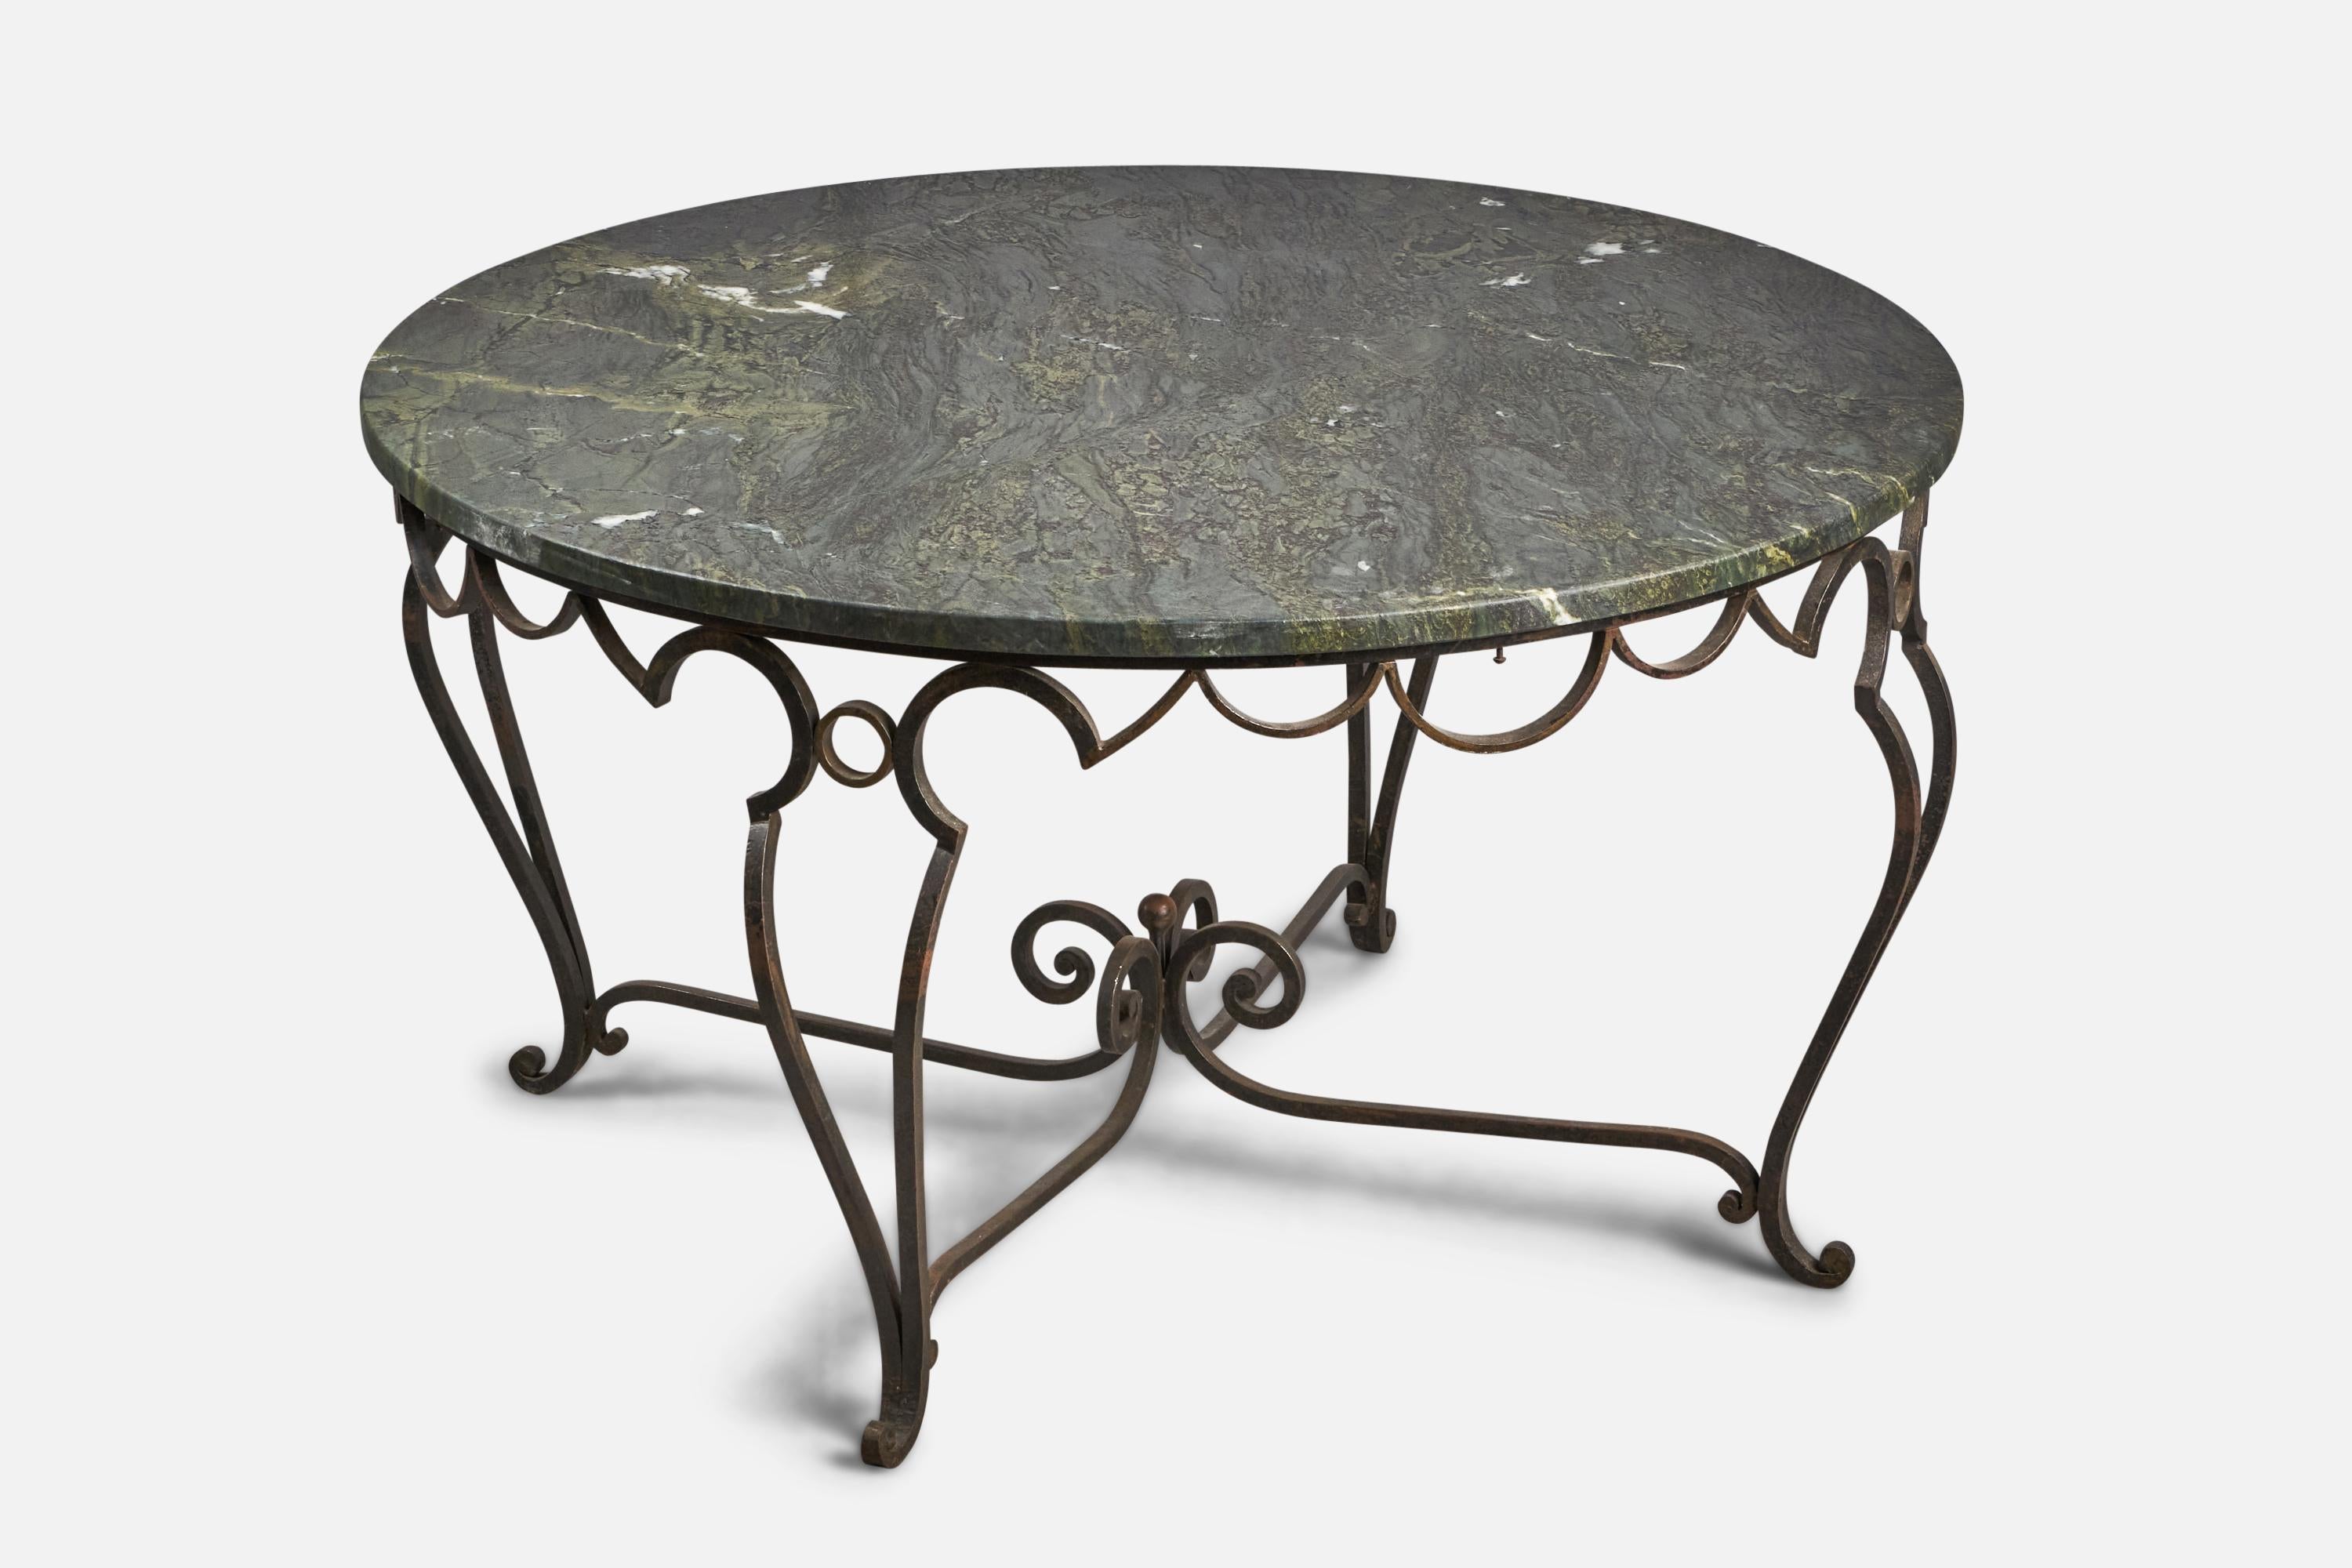 A sizeable black-painted wrought iron and marble center table designed and produced by John Vesey, USA, c. 1950s.